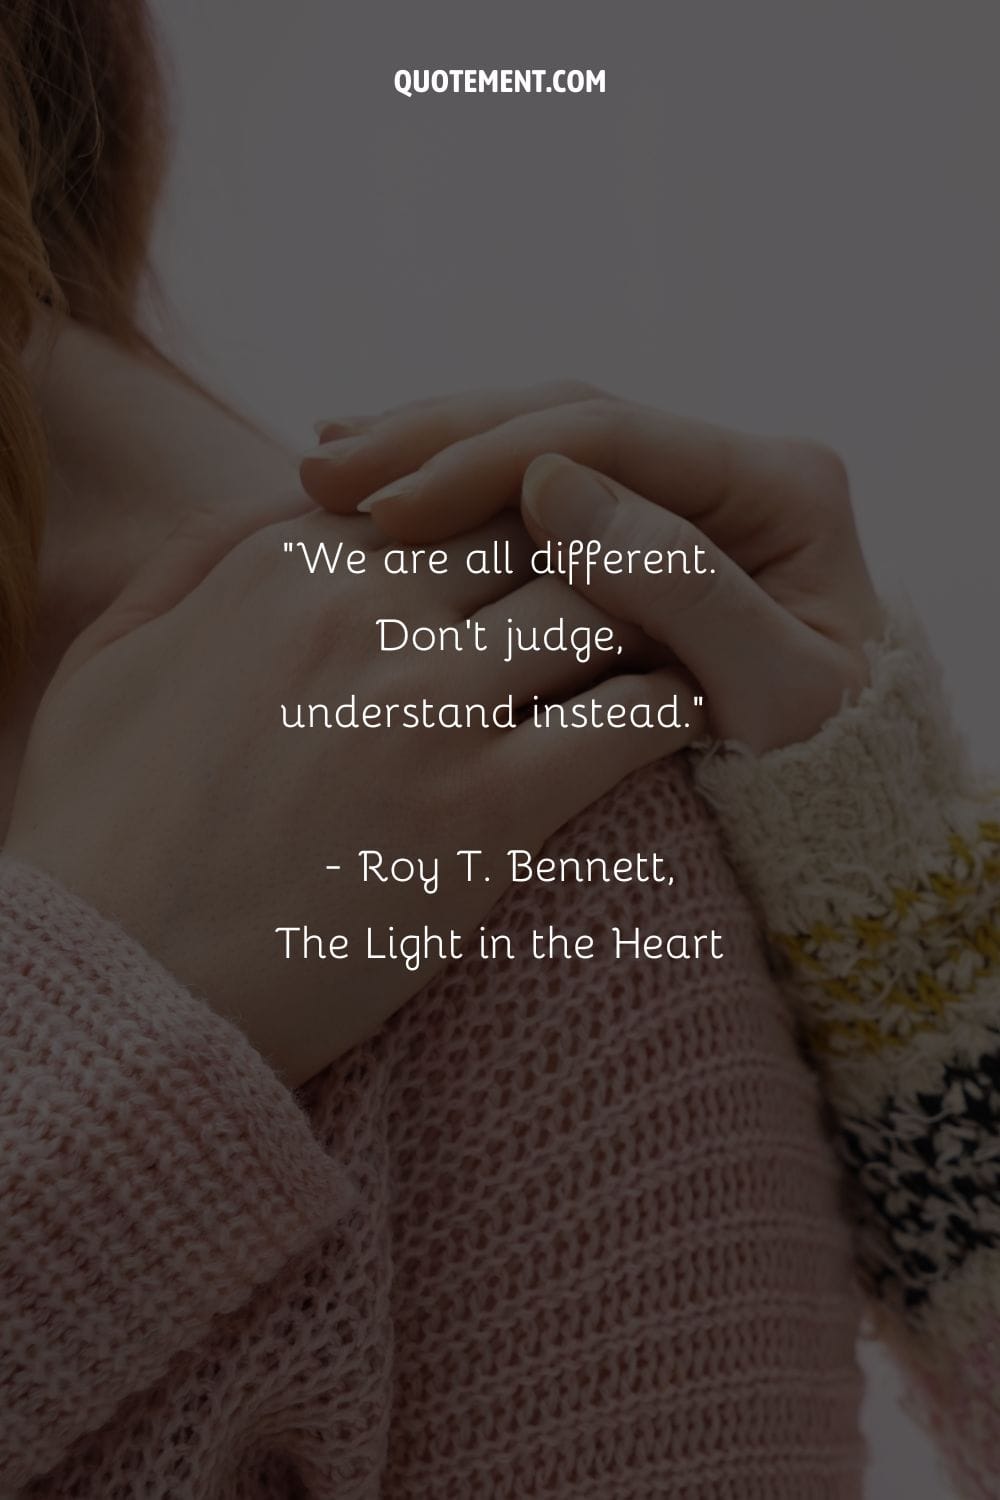 We are all different. Don’t judge, understand instead.